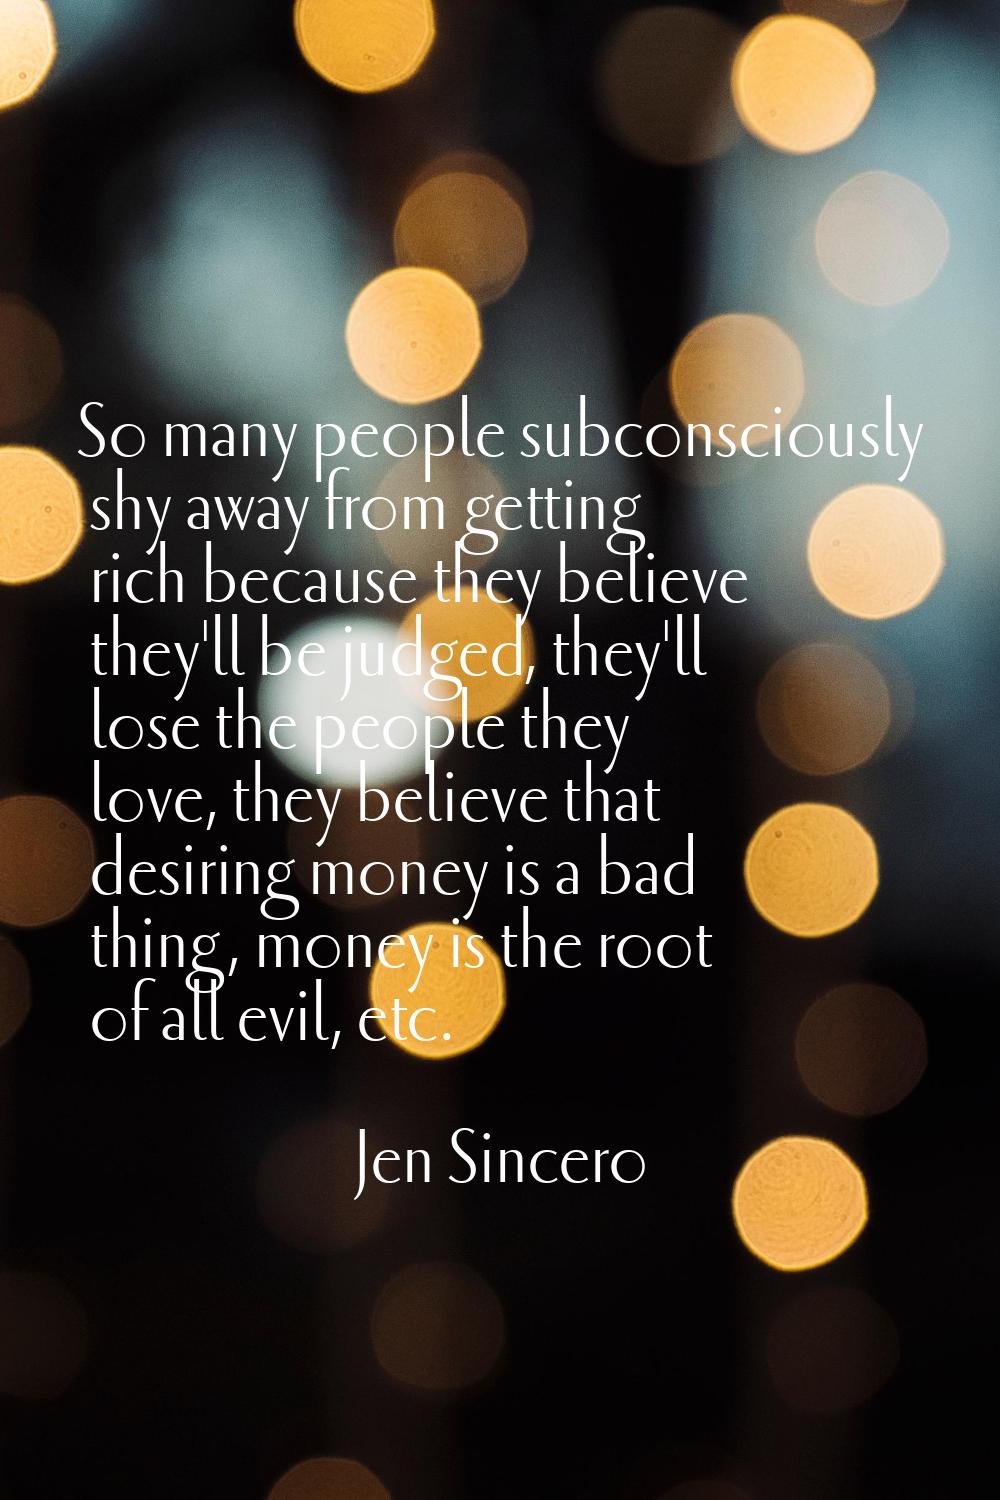 So many people subconsciously shy away from getting rich because they believe they'll be judged, th